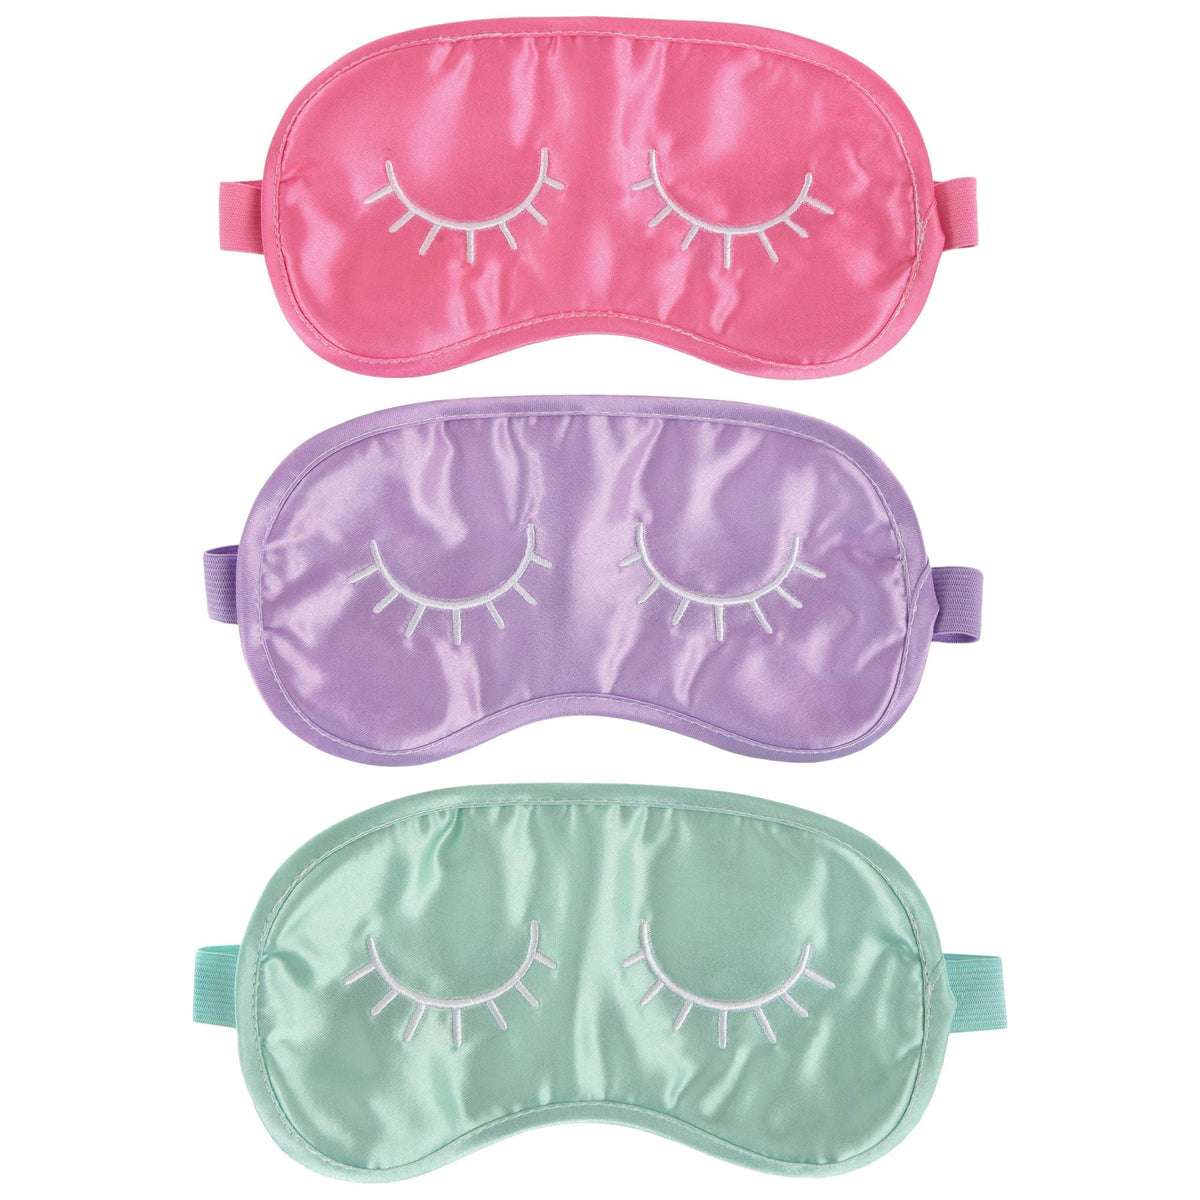 AMSCAN CA Kids Birthday Spa Party Eye Masks, 6 Count 192937440513